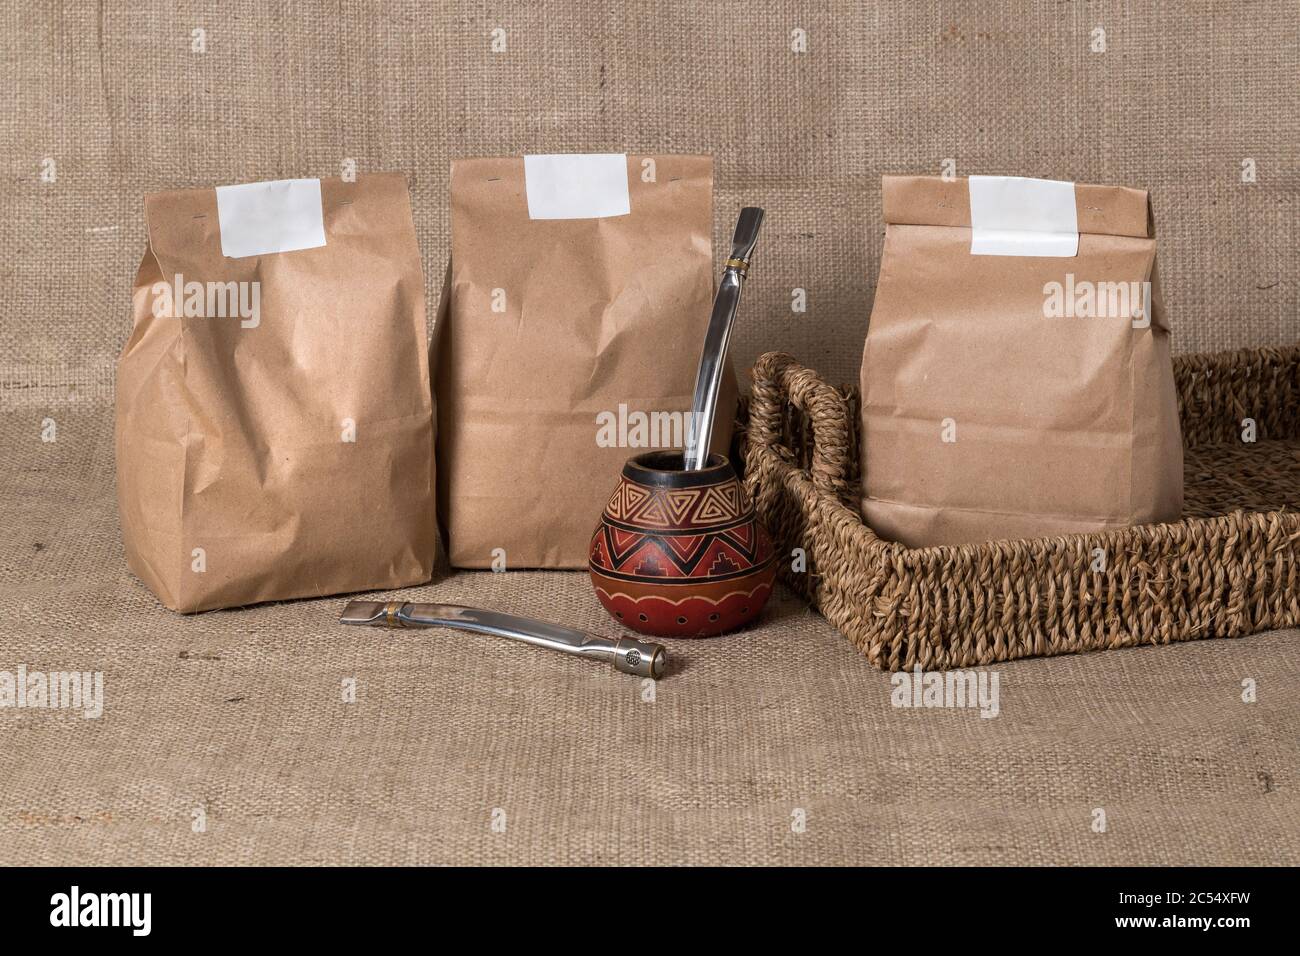 Packs for yerba made of kraft paper. Mate recipient with tube for sipping. Blank space for logo or name mockup. Stock Photo